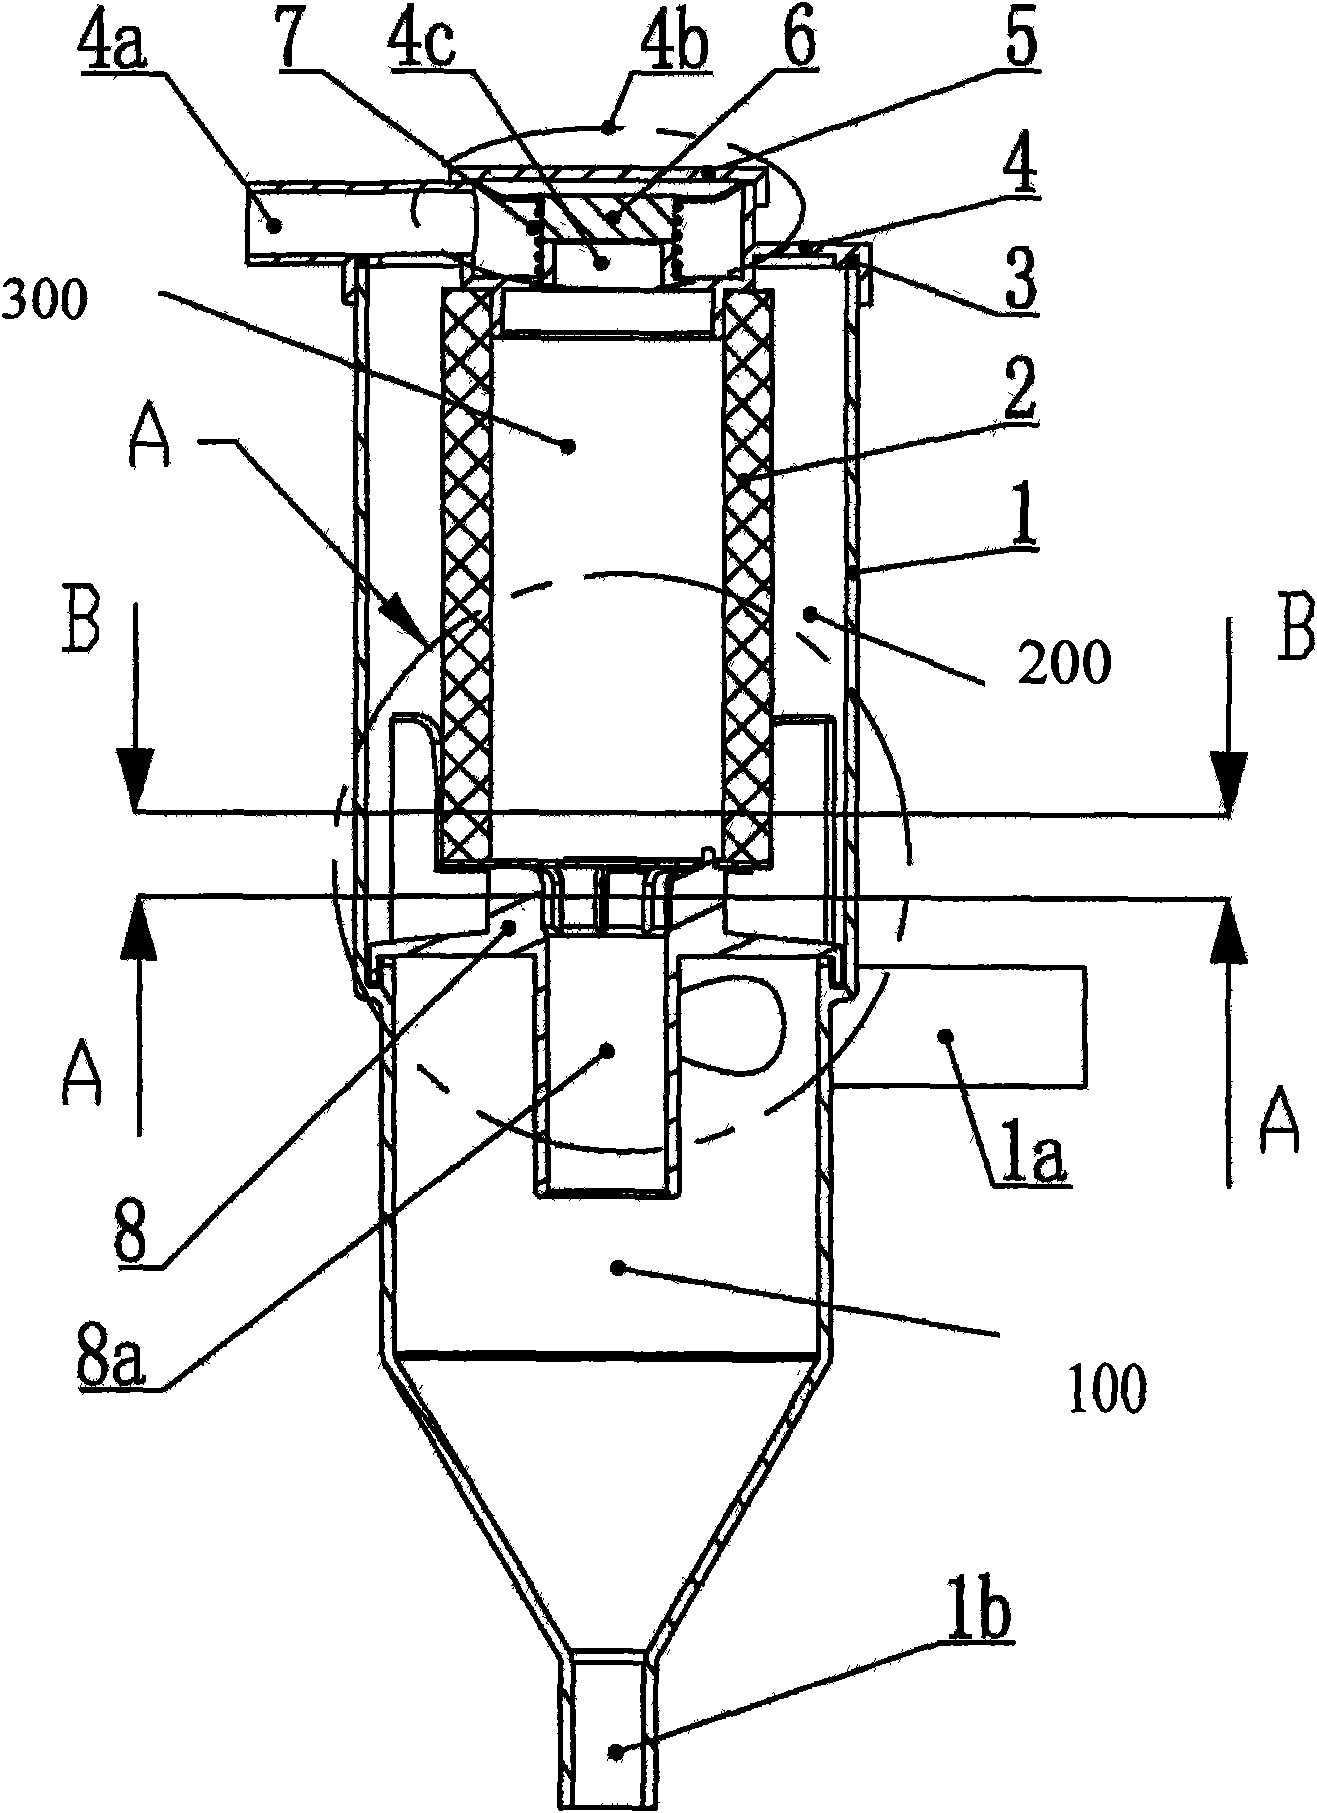 Gas and oil separating plant for internal combustion engine